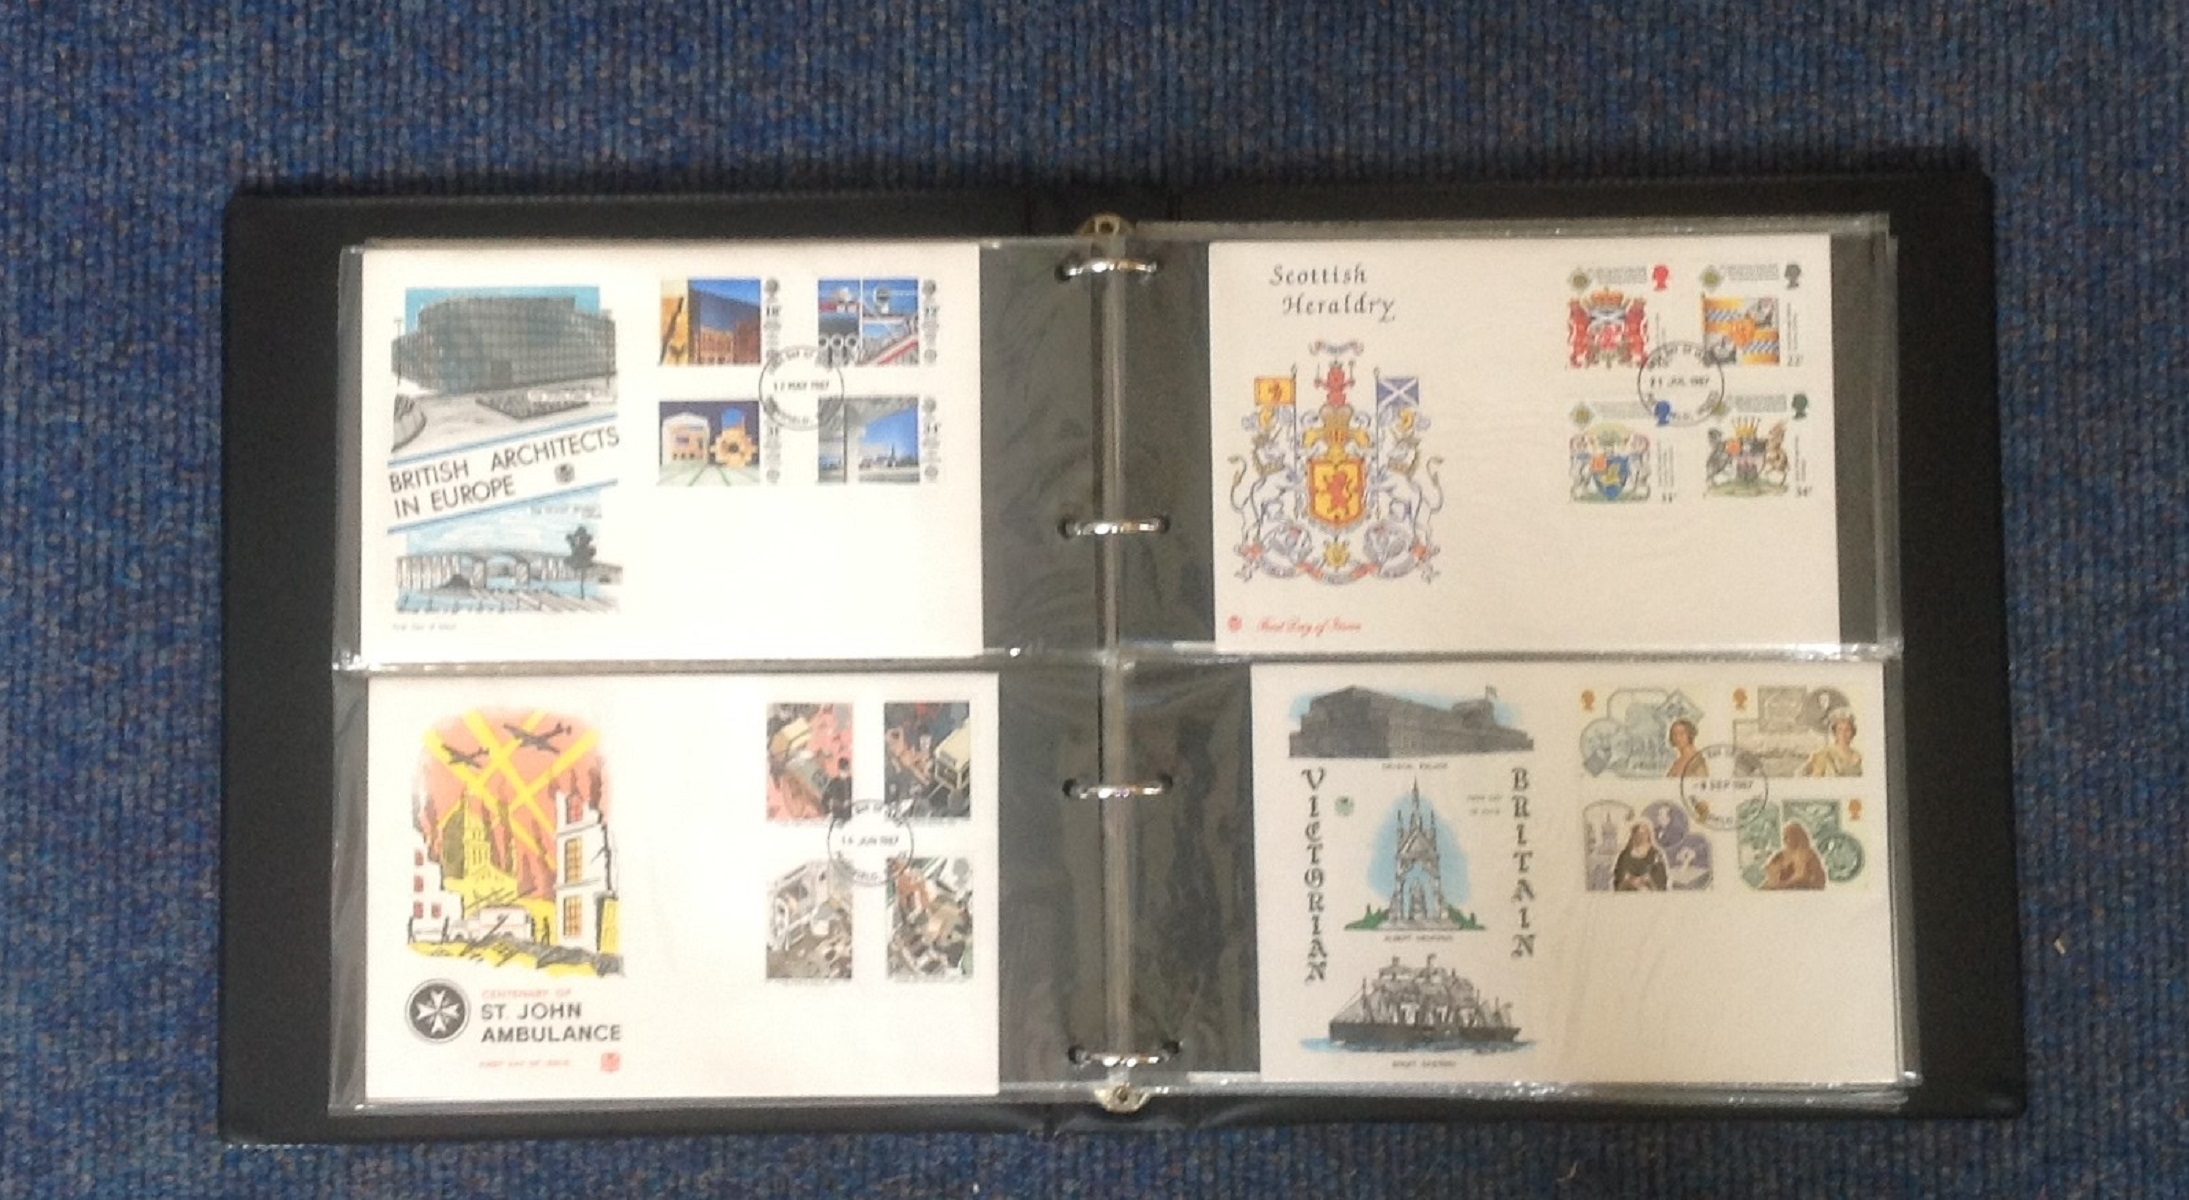 GB Clean FDC collection, 46 covers from 1985, 1989 including many nice Stuart covers in Black 4 ring - Image 4 of 6